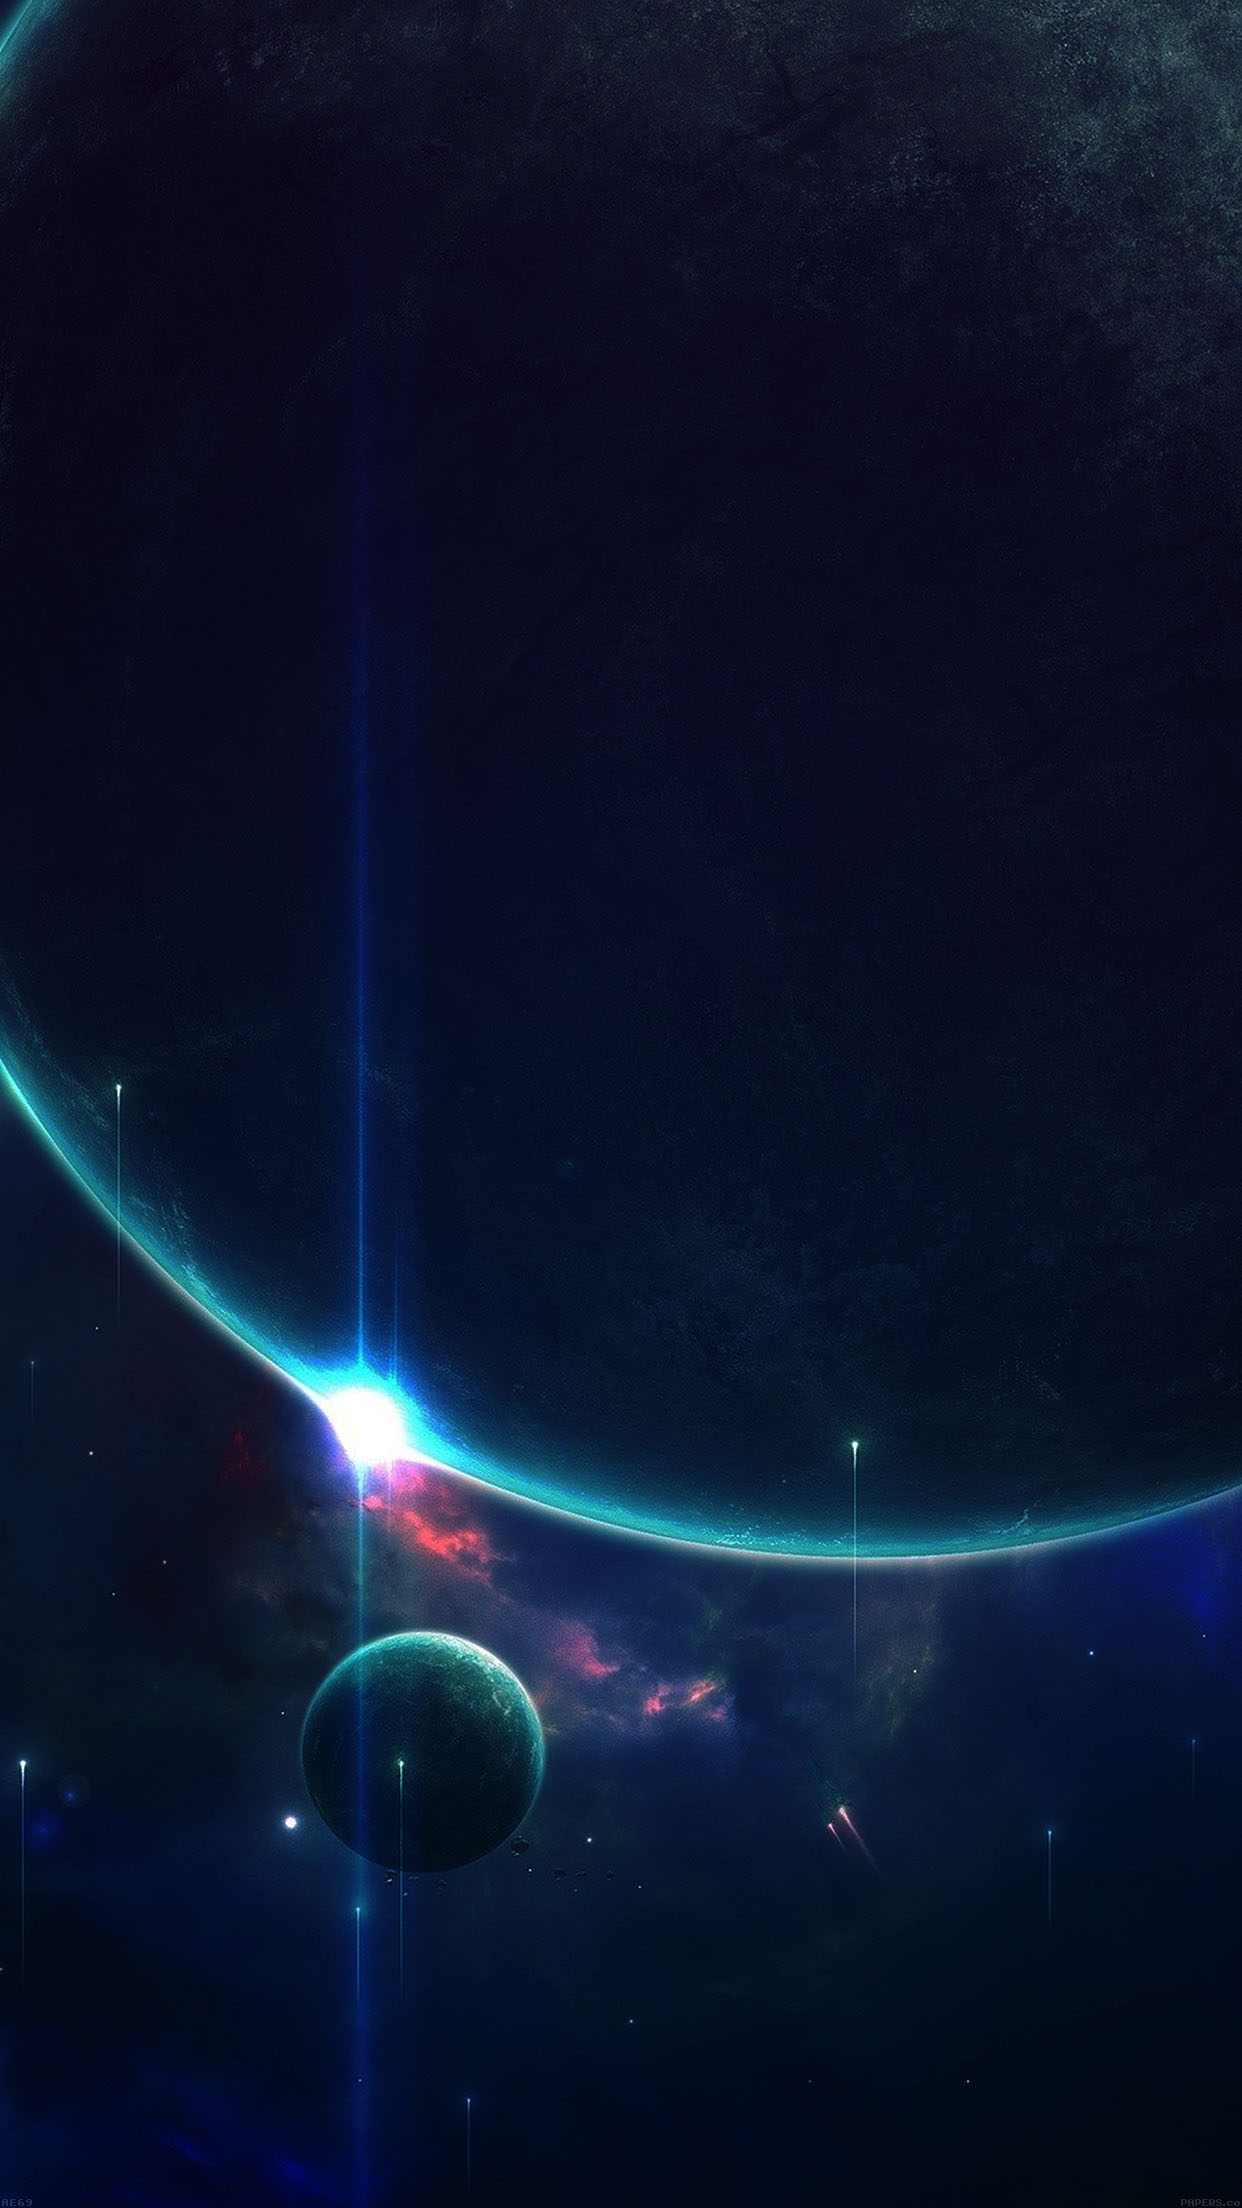 space wallpaper android,sky,blue,light,atmosphere,space